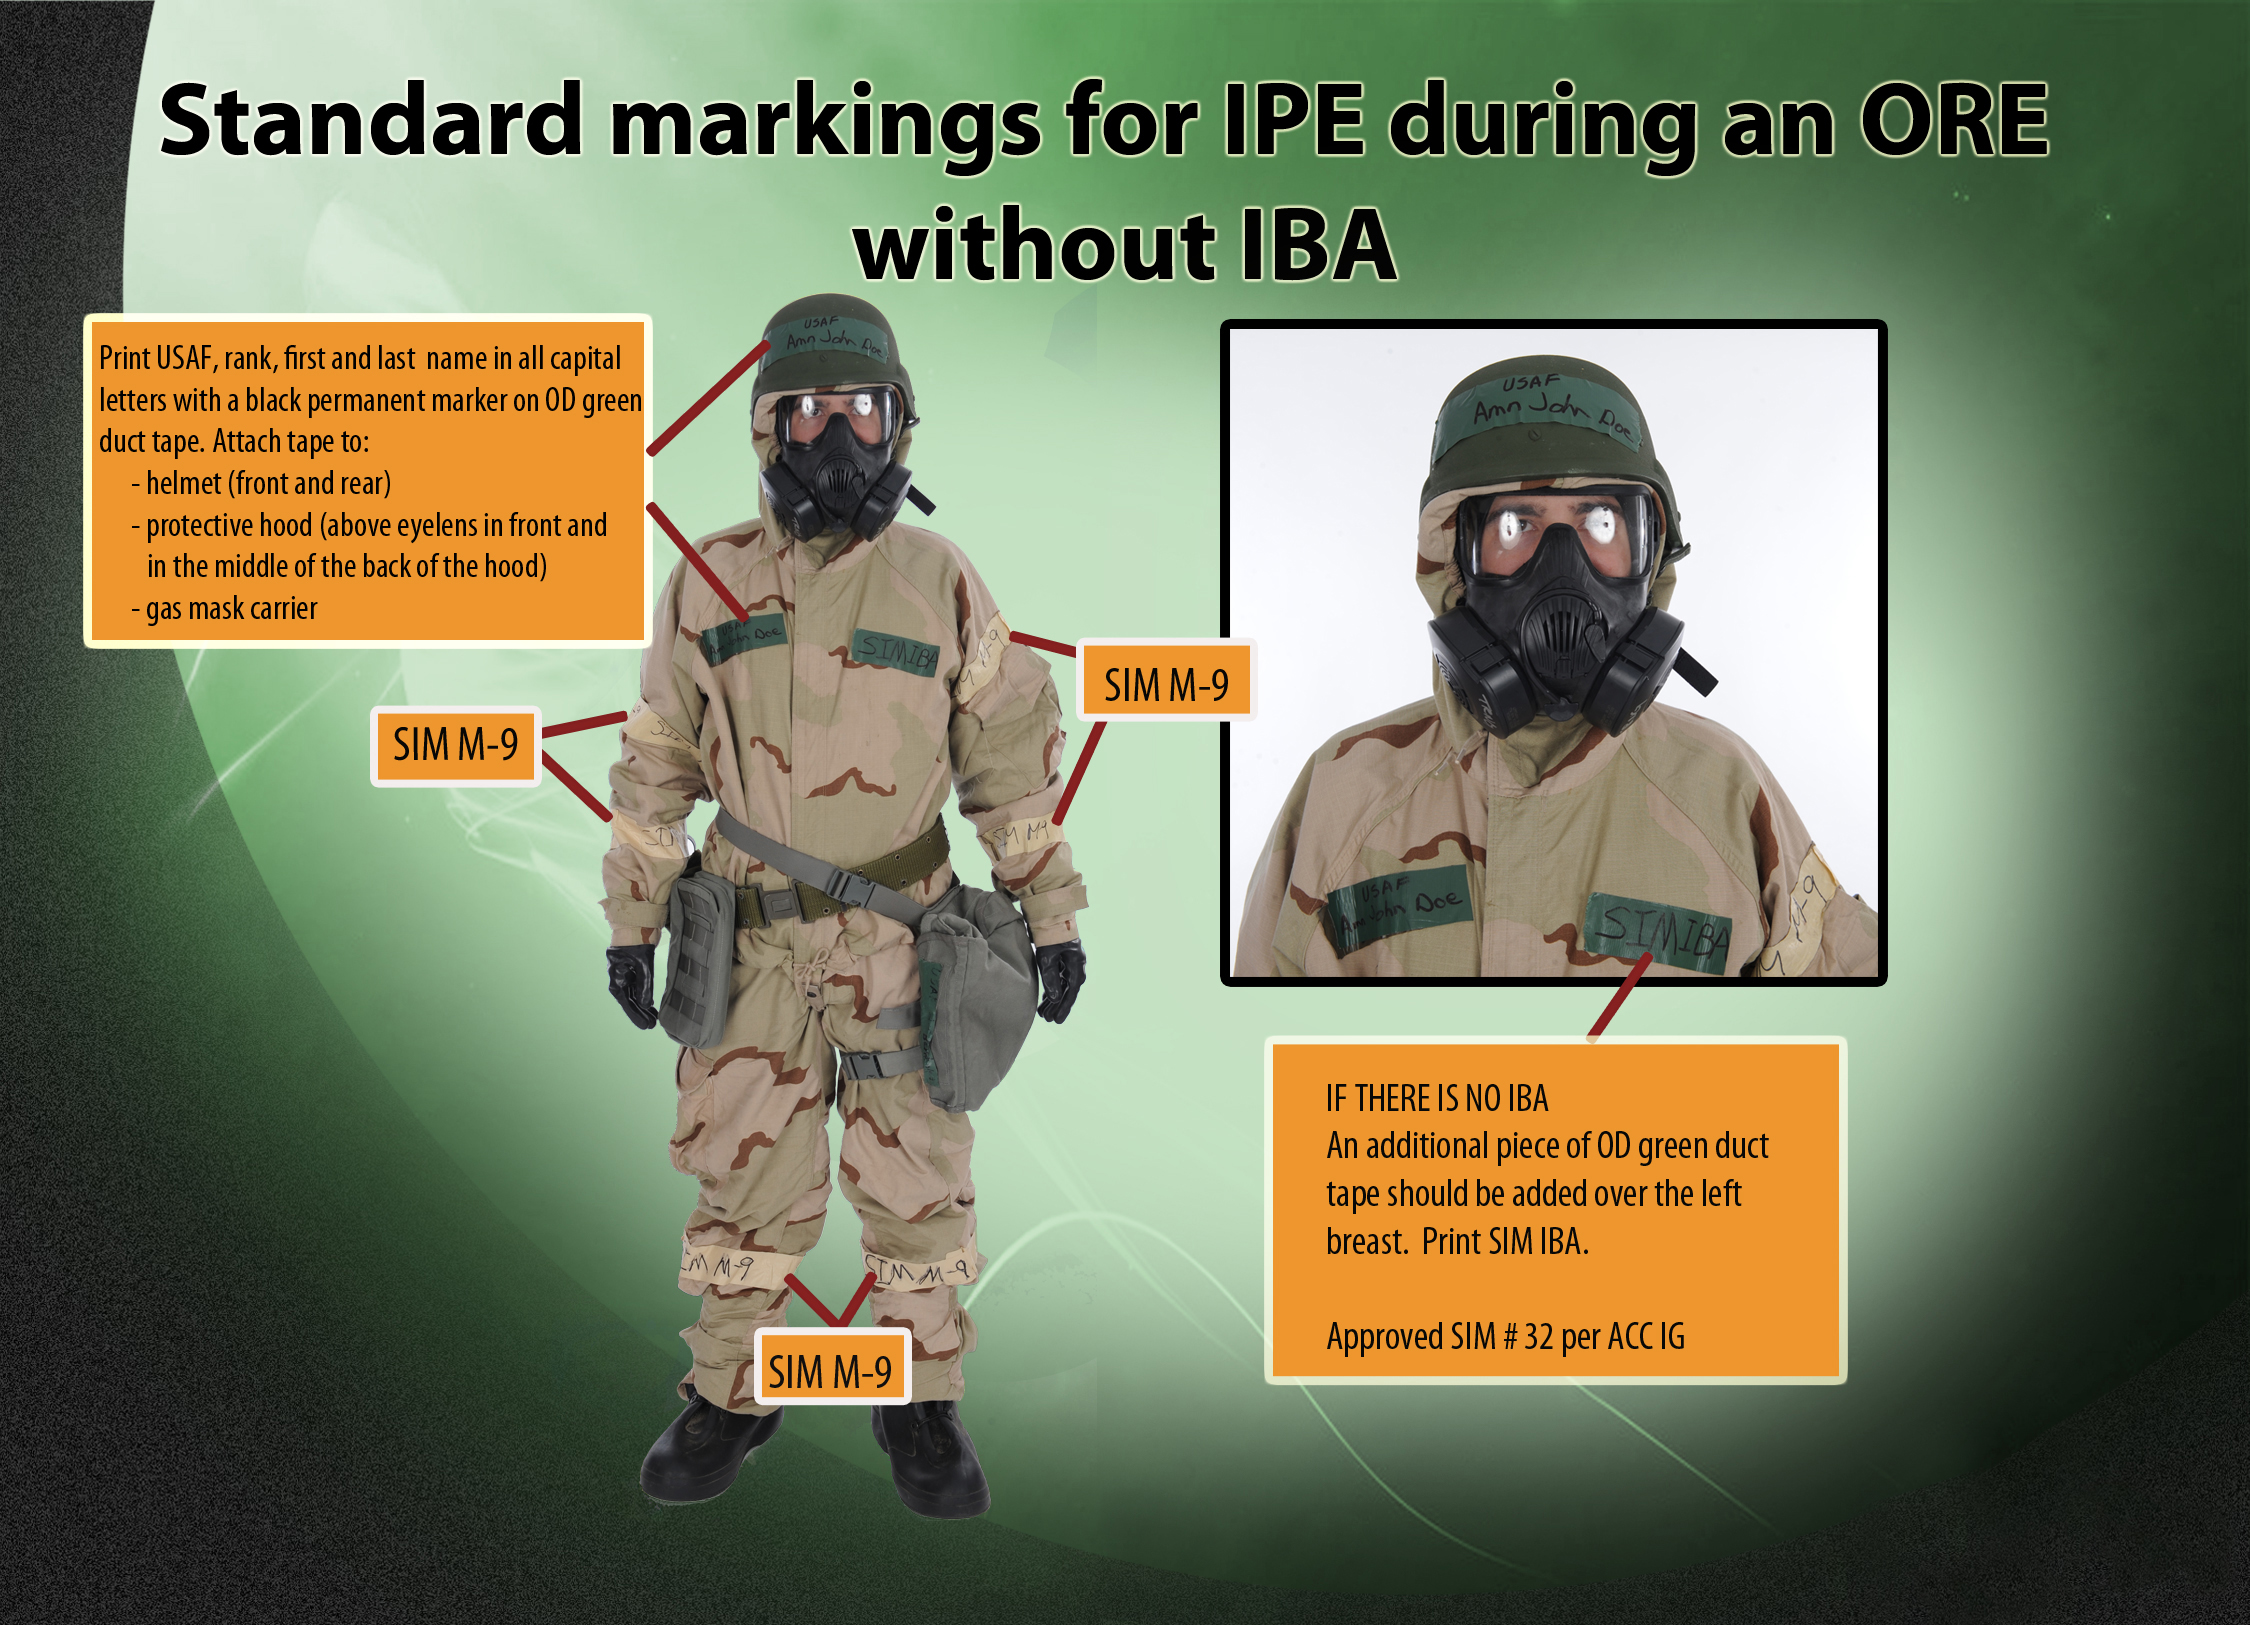 Standard markings for IPE during an ORE without IBA